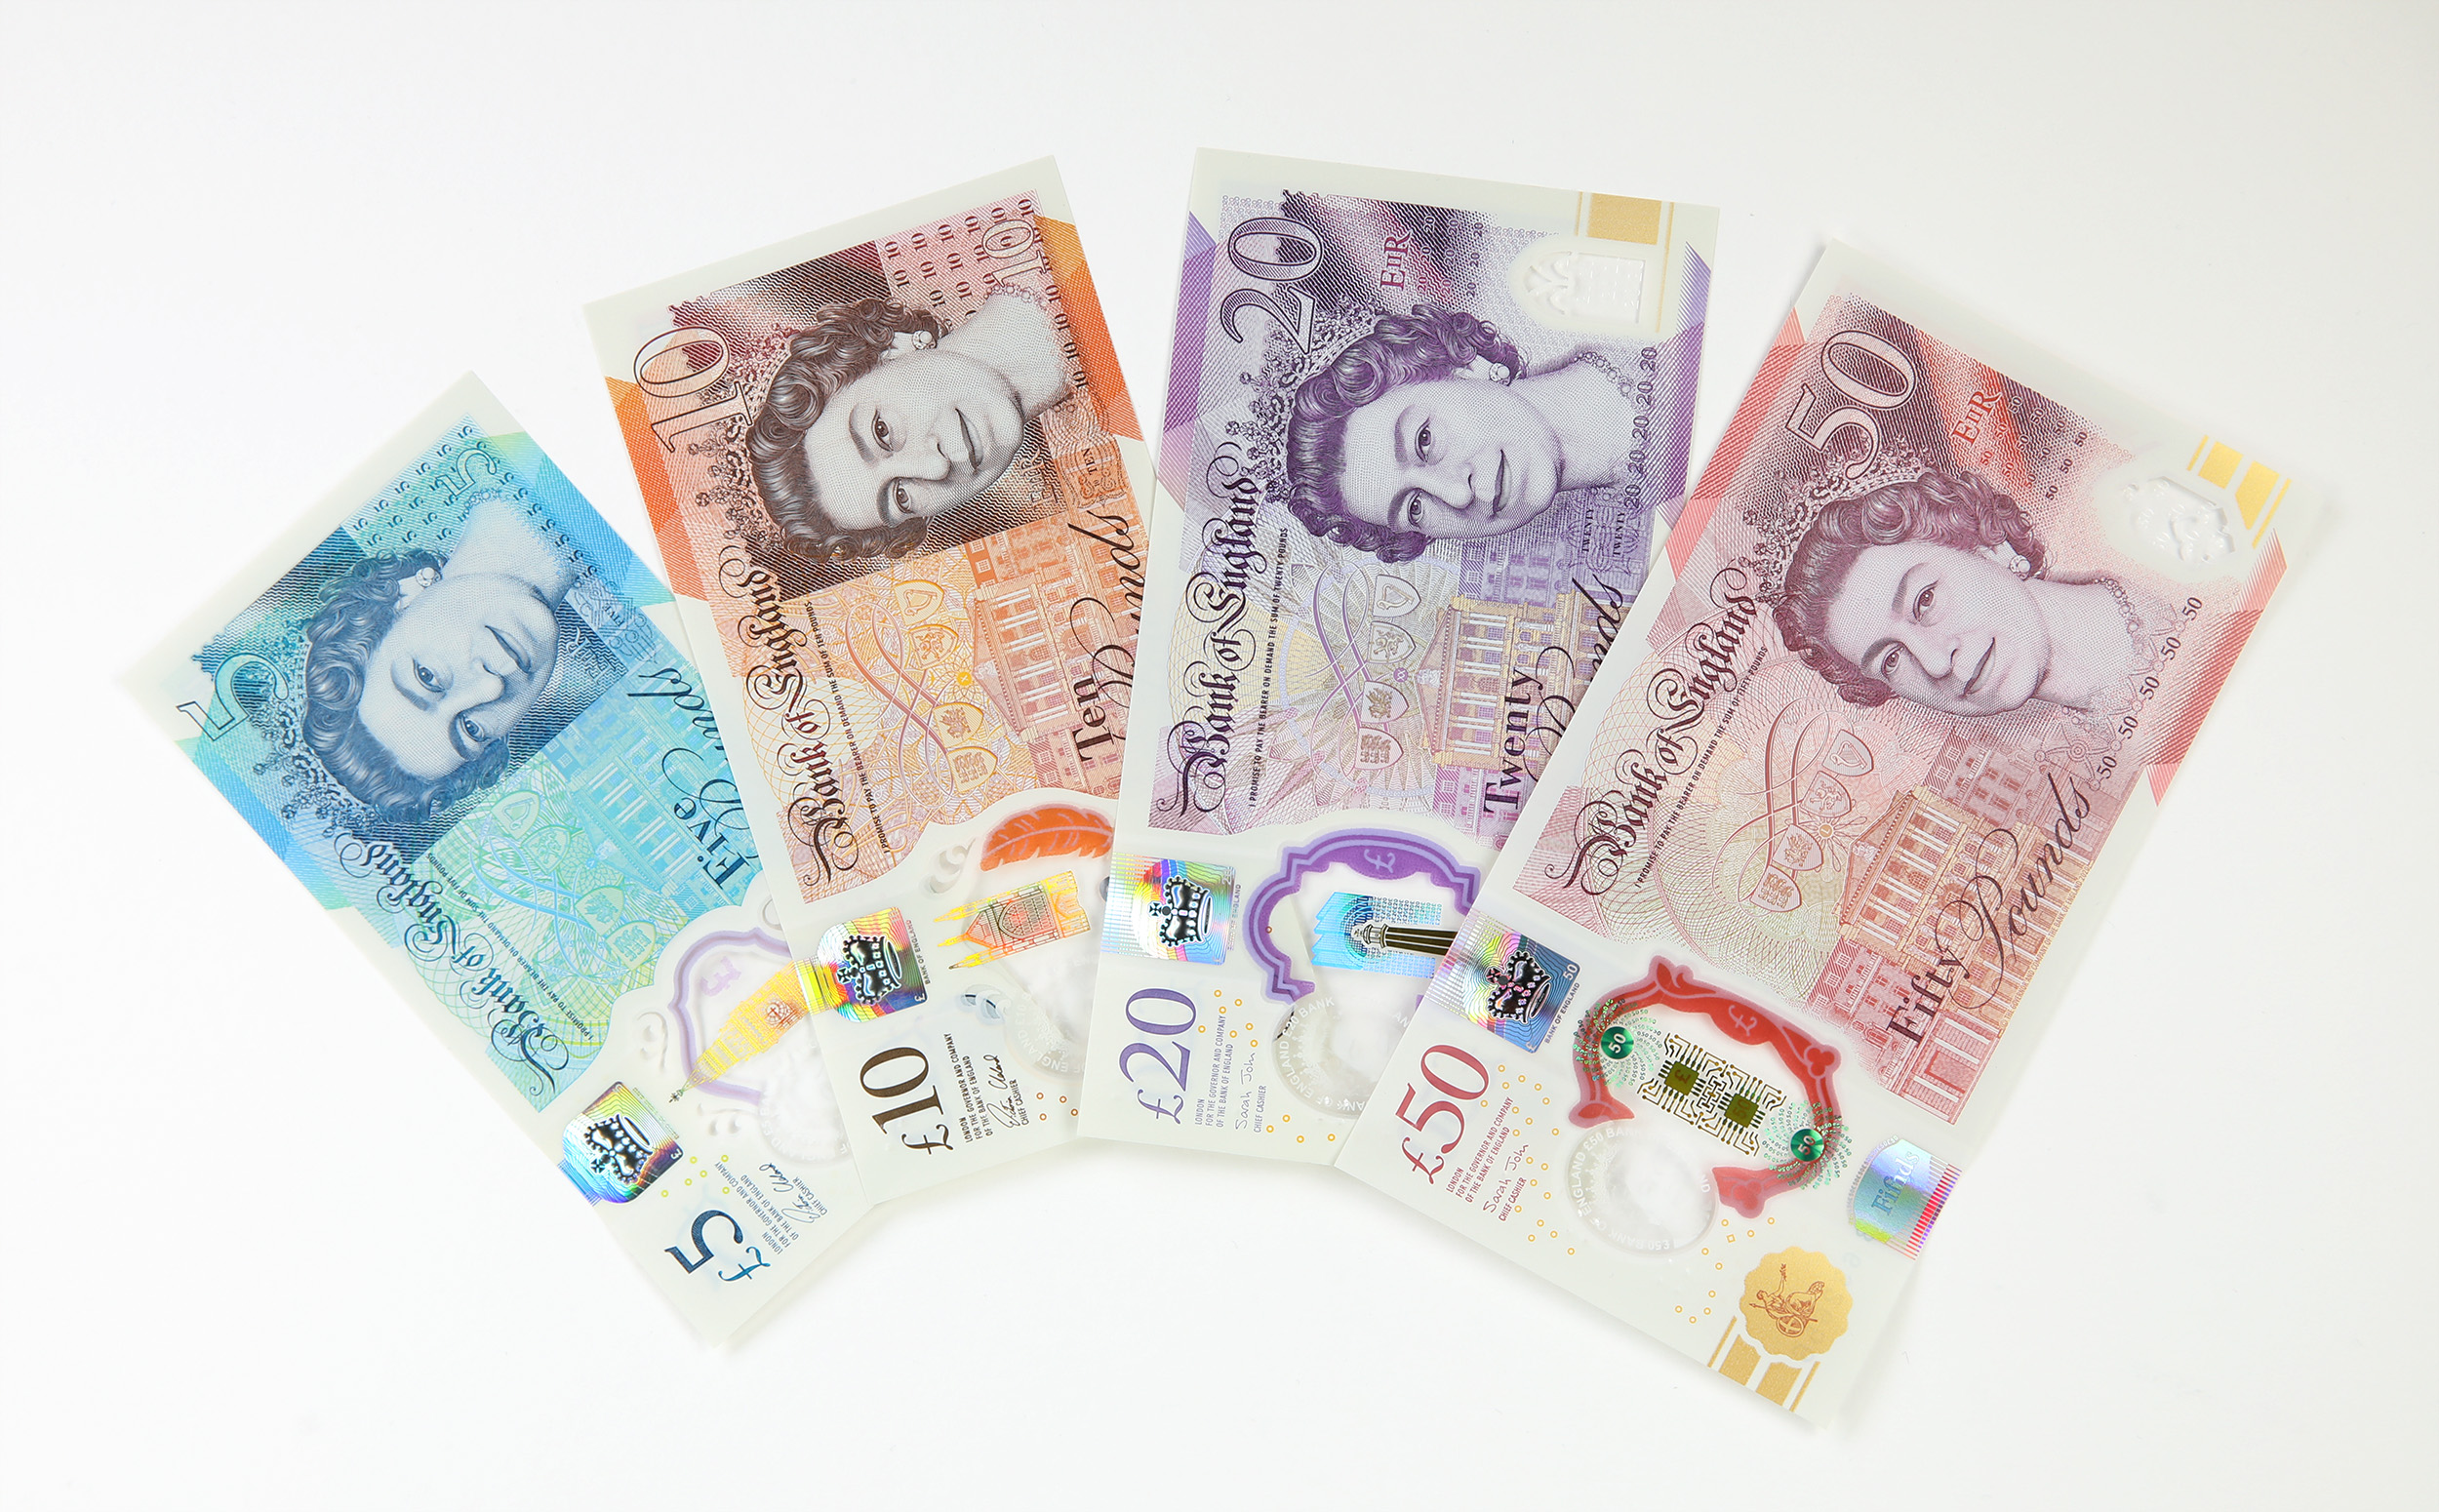 One of each of the current British banknotes